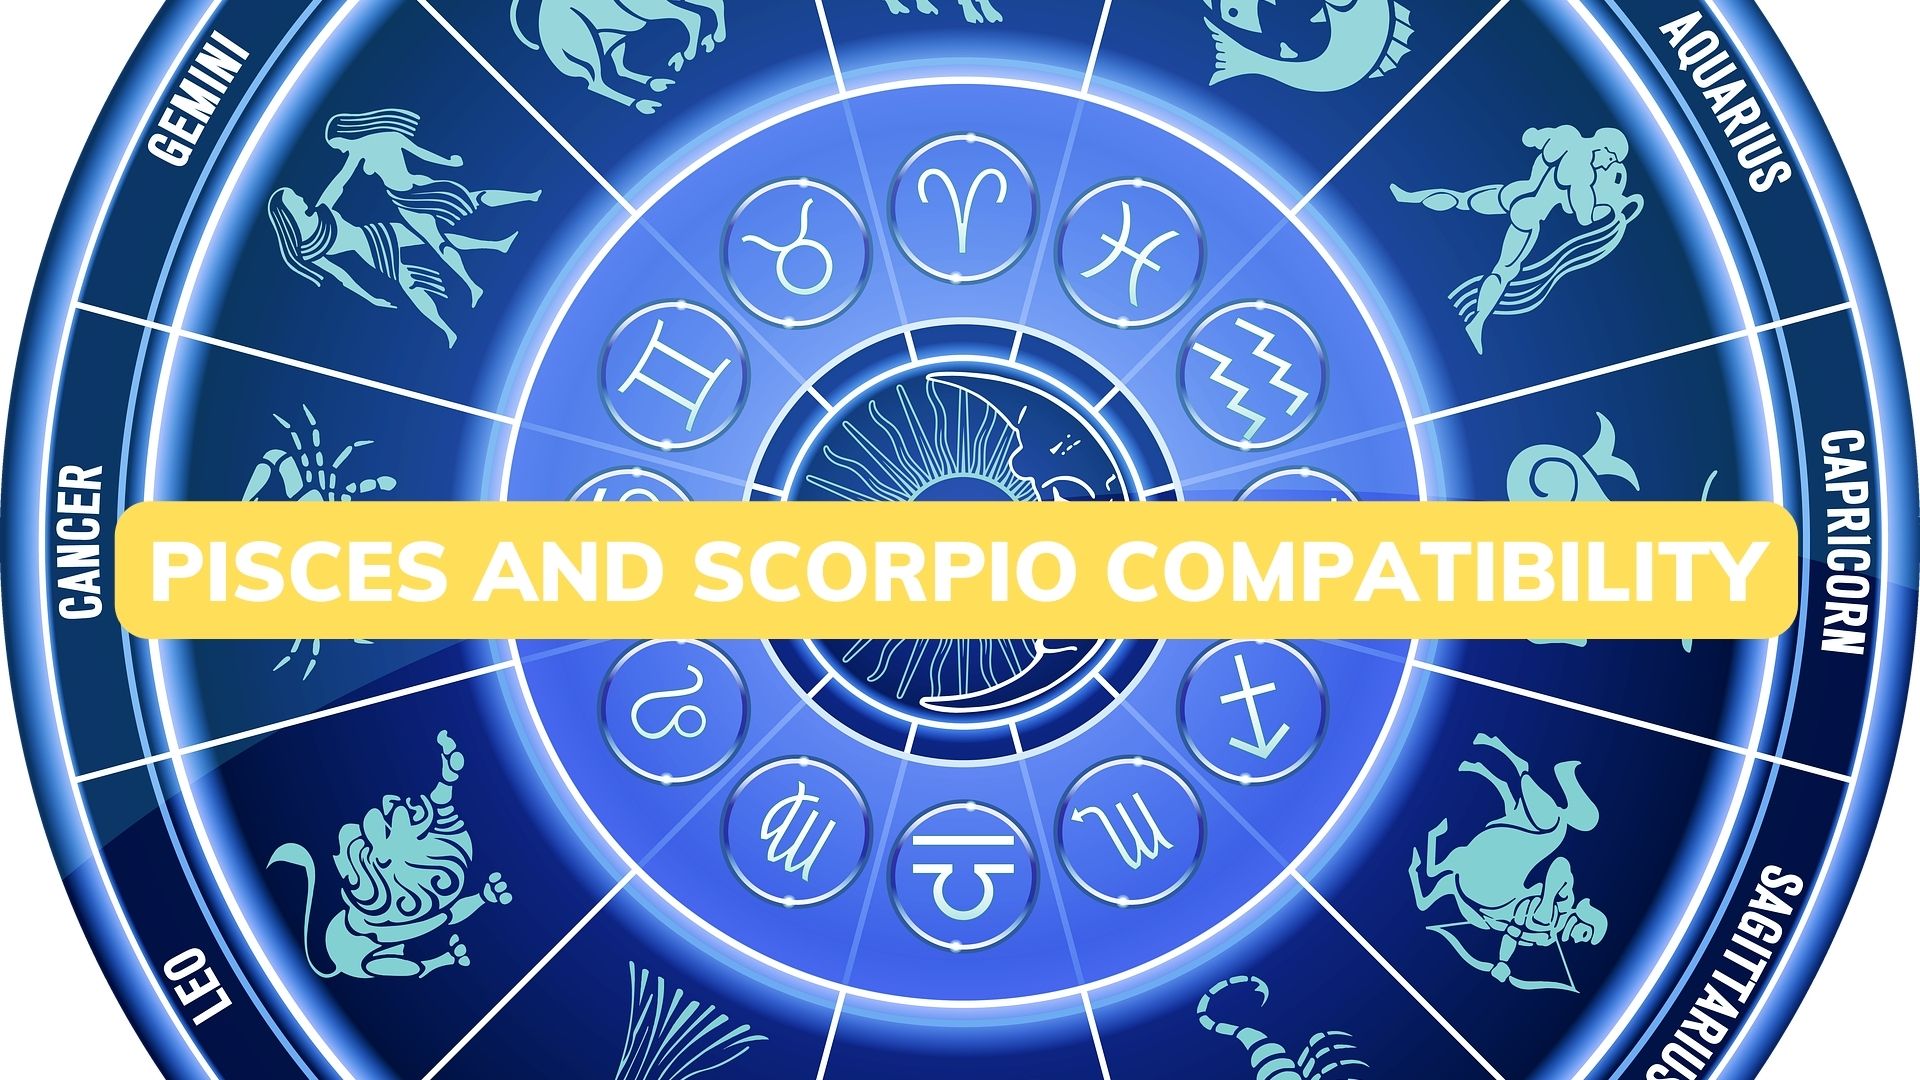 Pisces And Scorpio Compatibility - Best Match For Love